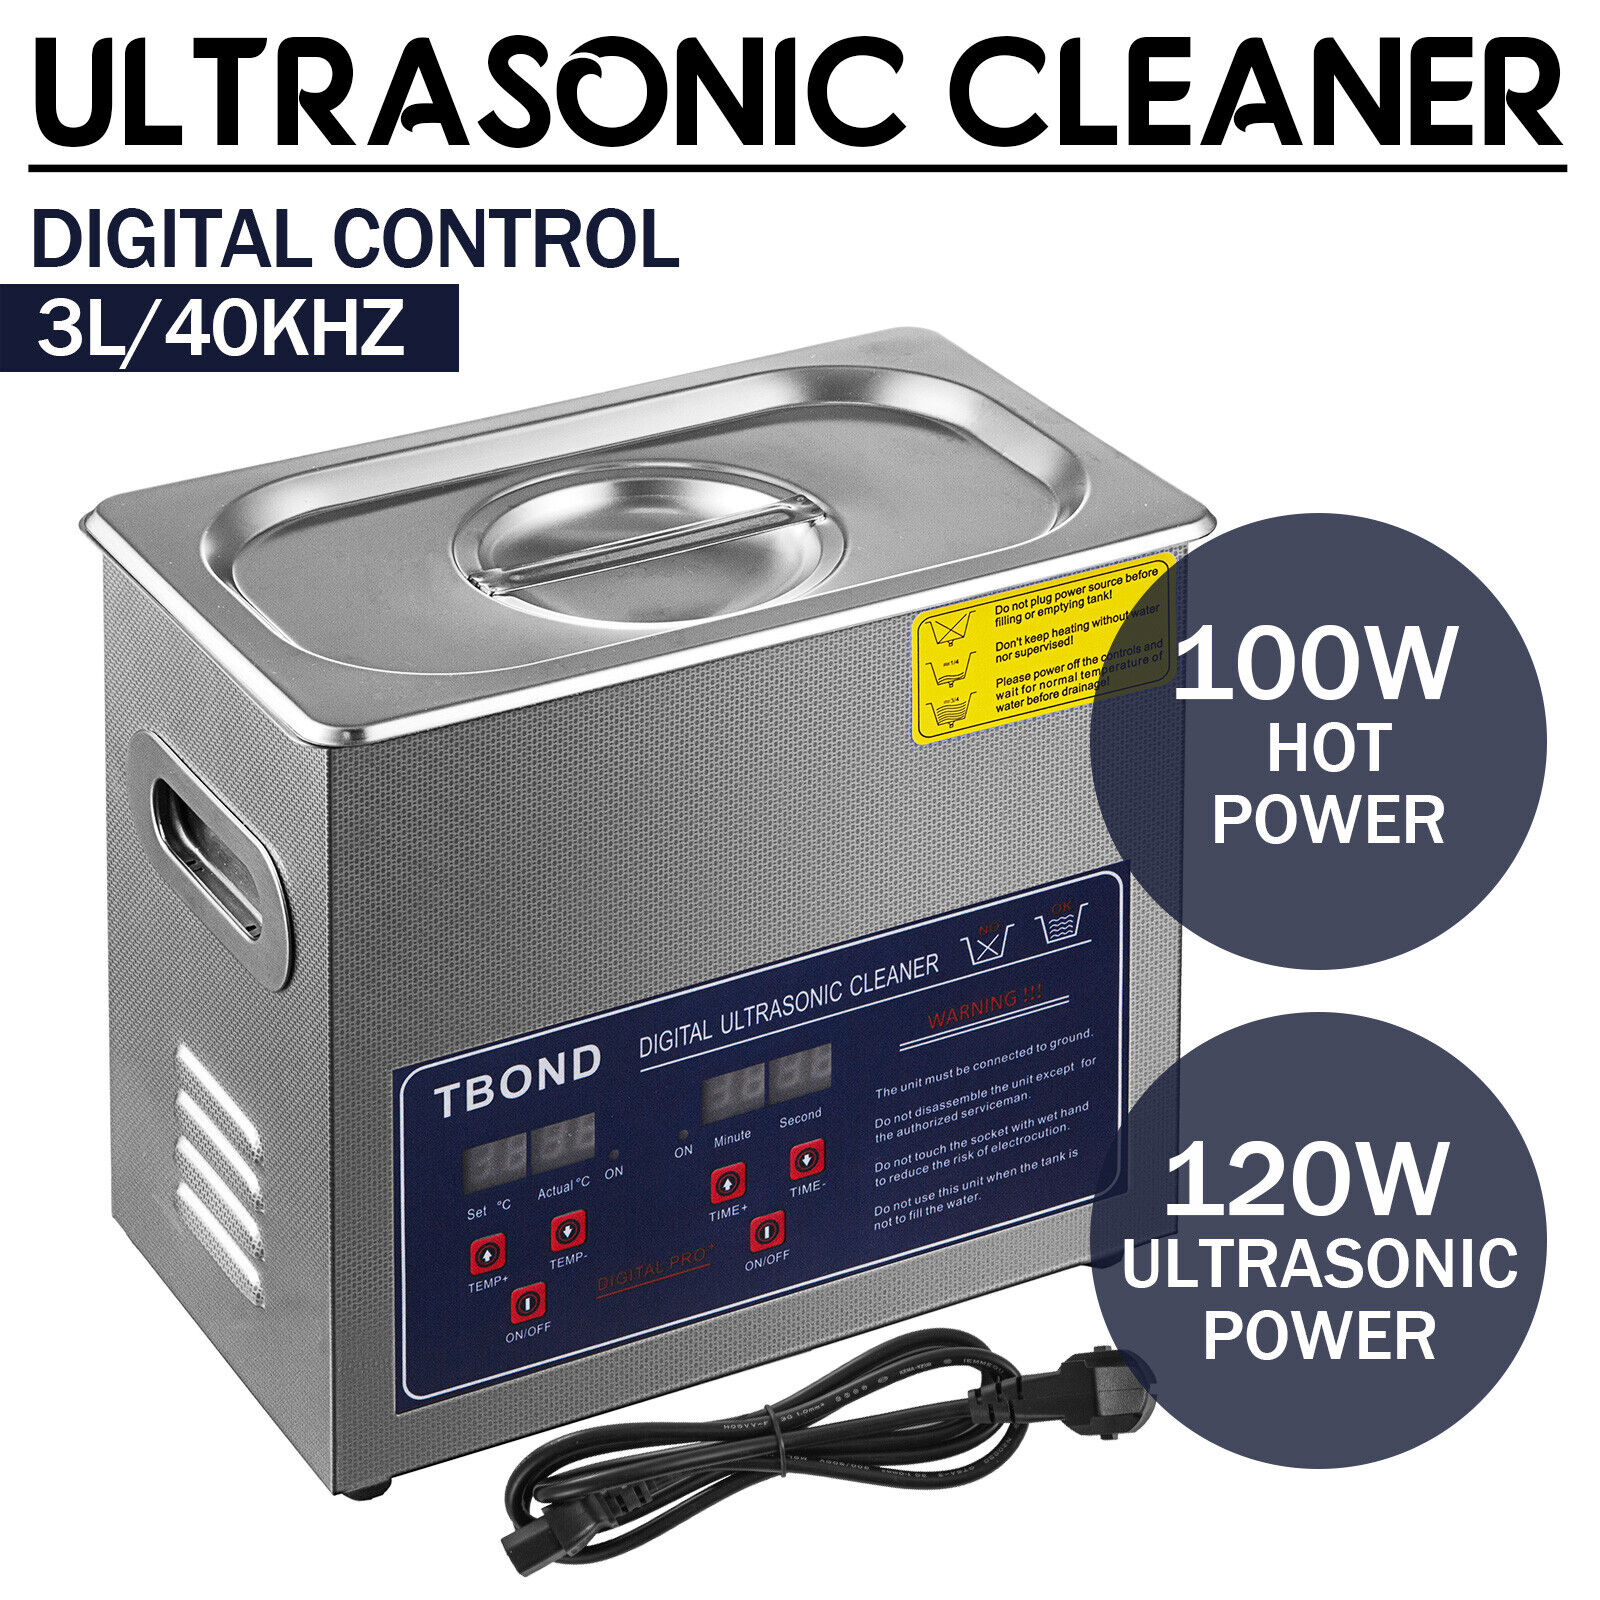 Stainless Steel 3L Liter Industry Heated Ultrasonic Cleaner Heater w/Timer